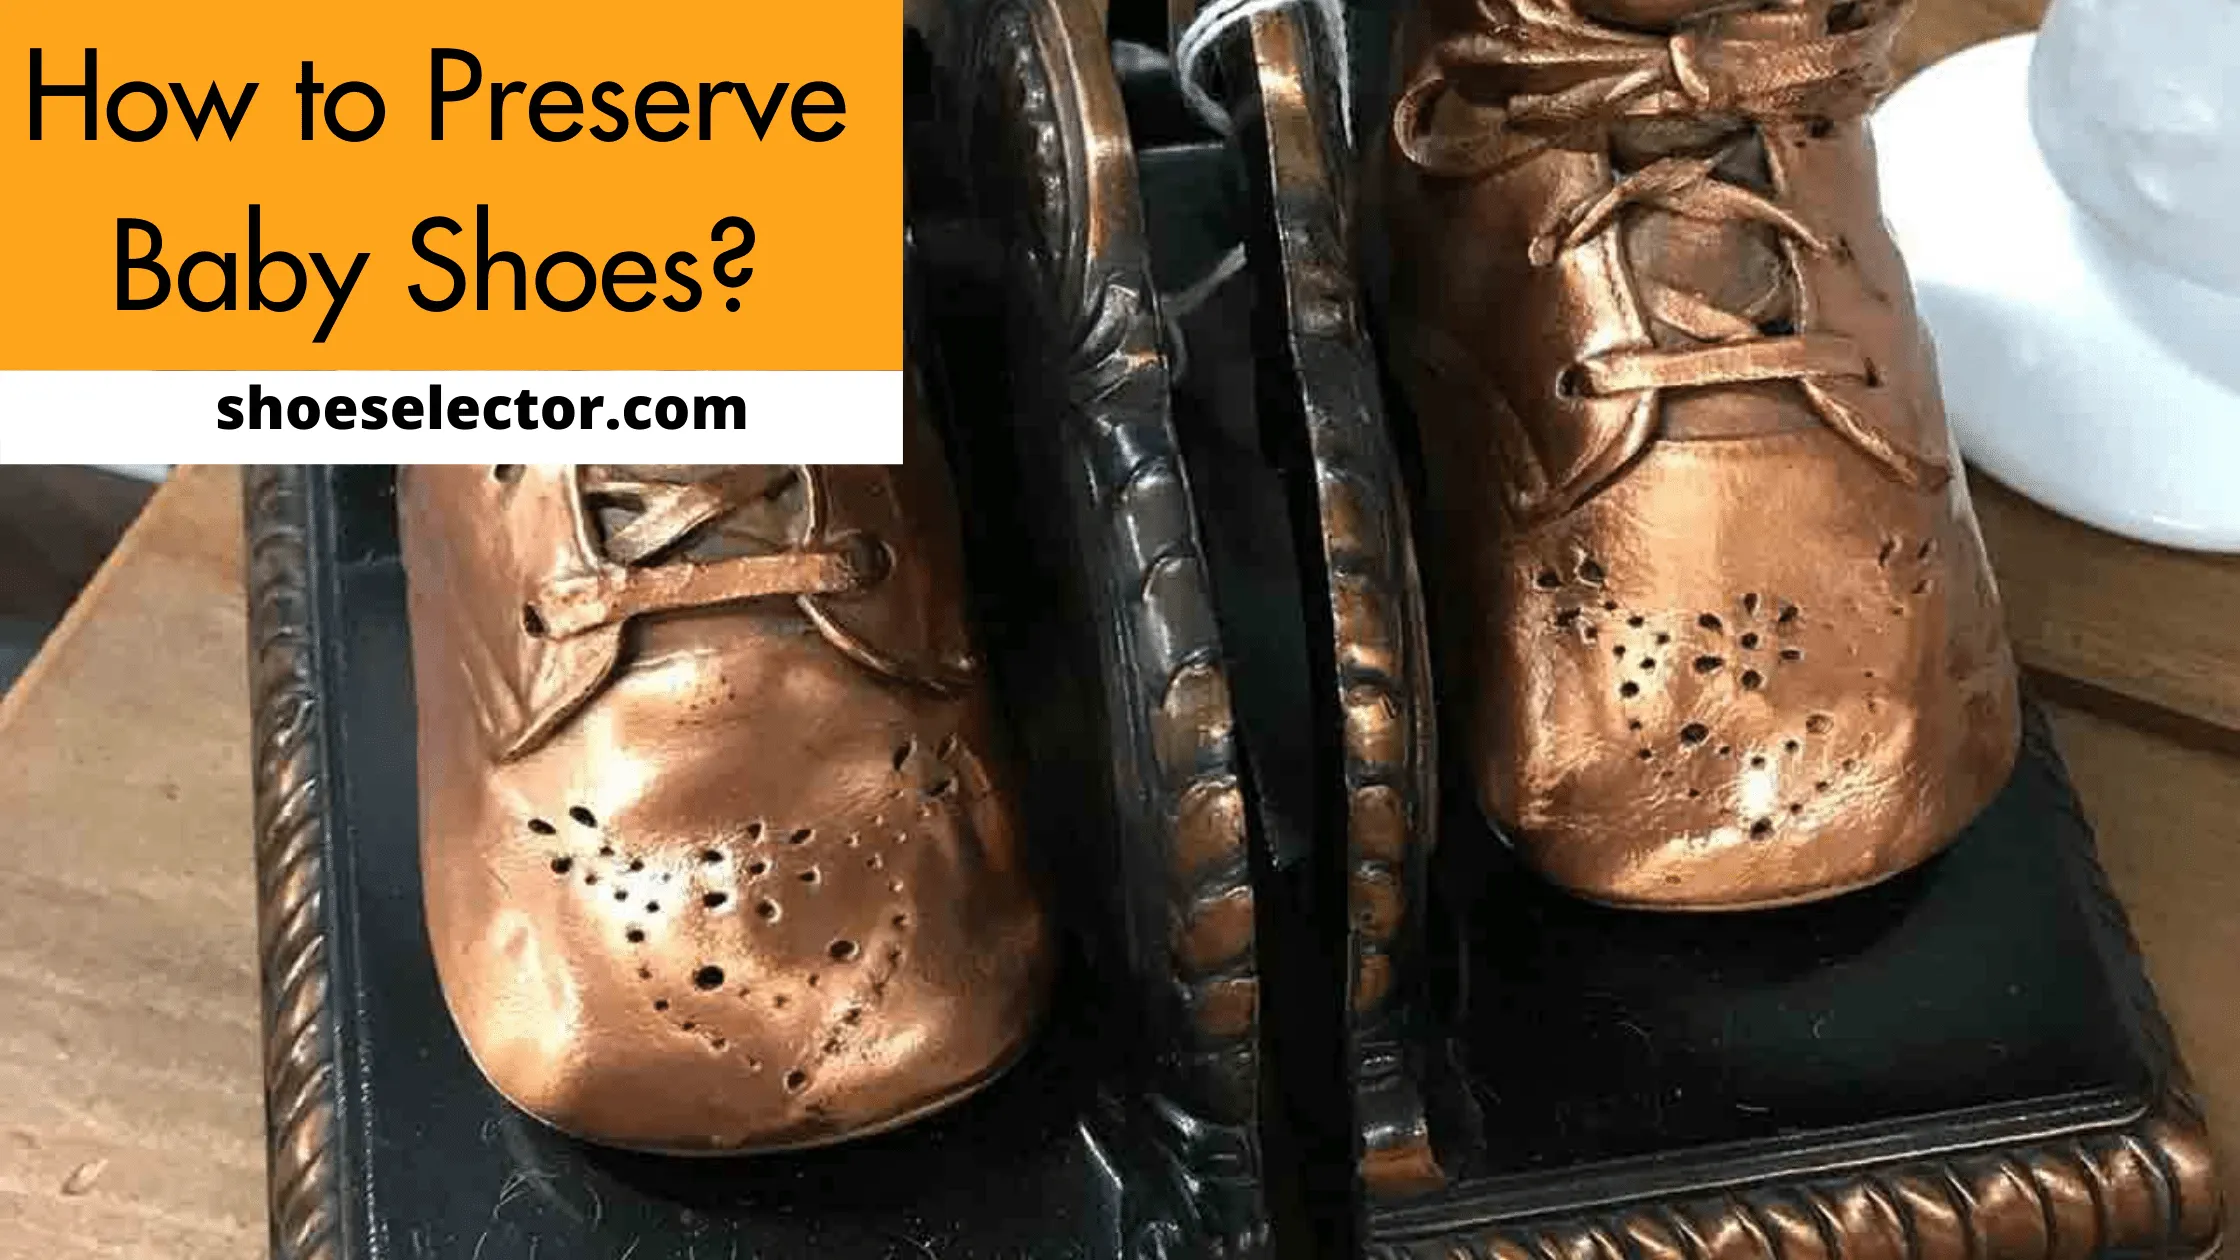 How to Preserve Baby Shoes? Easy Ways